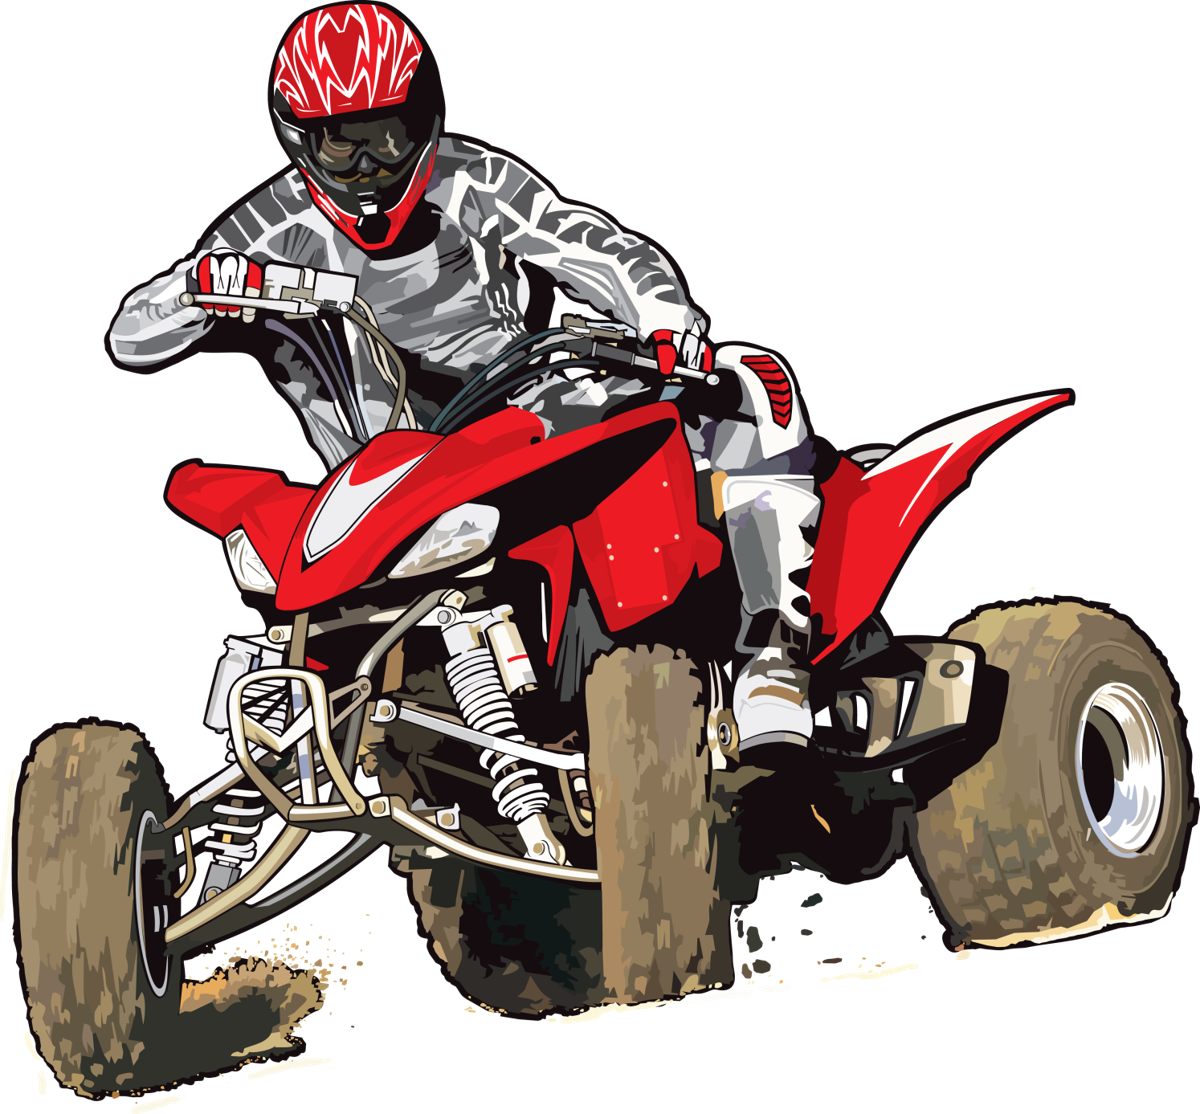 4-wheeler races coming to the Jefferson County Fair | News |  